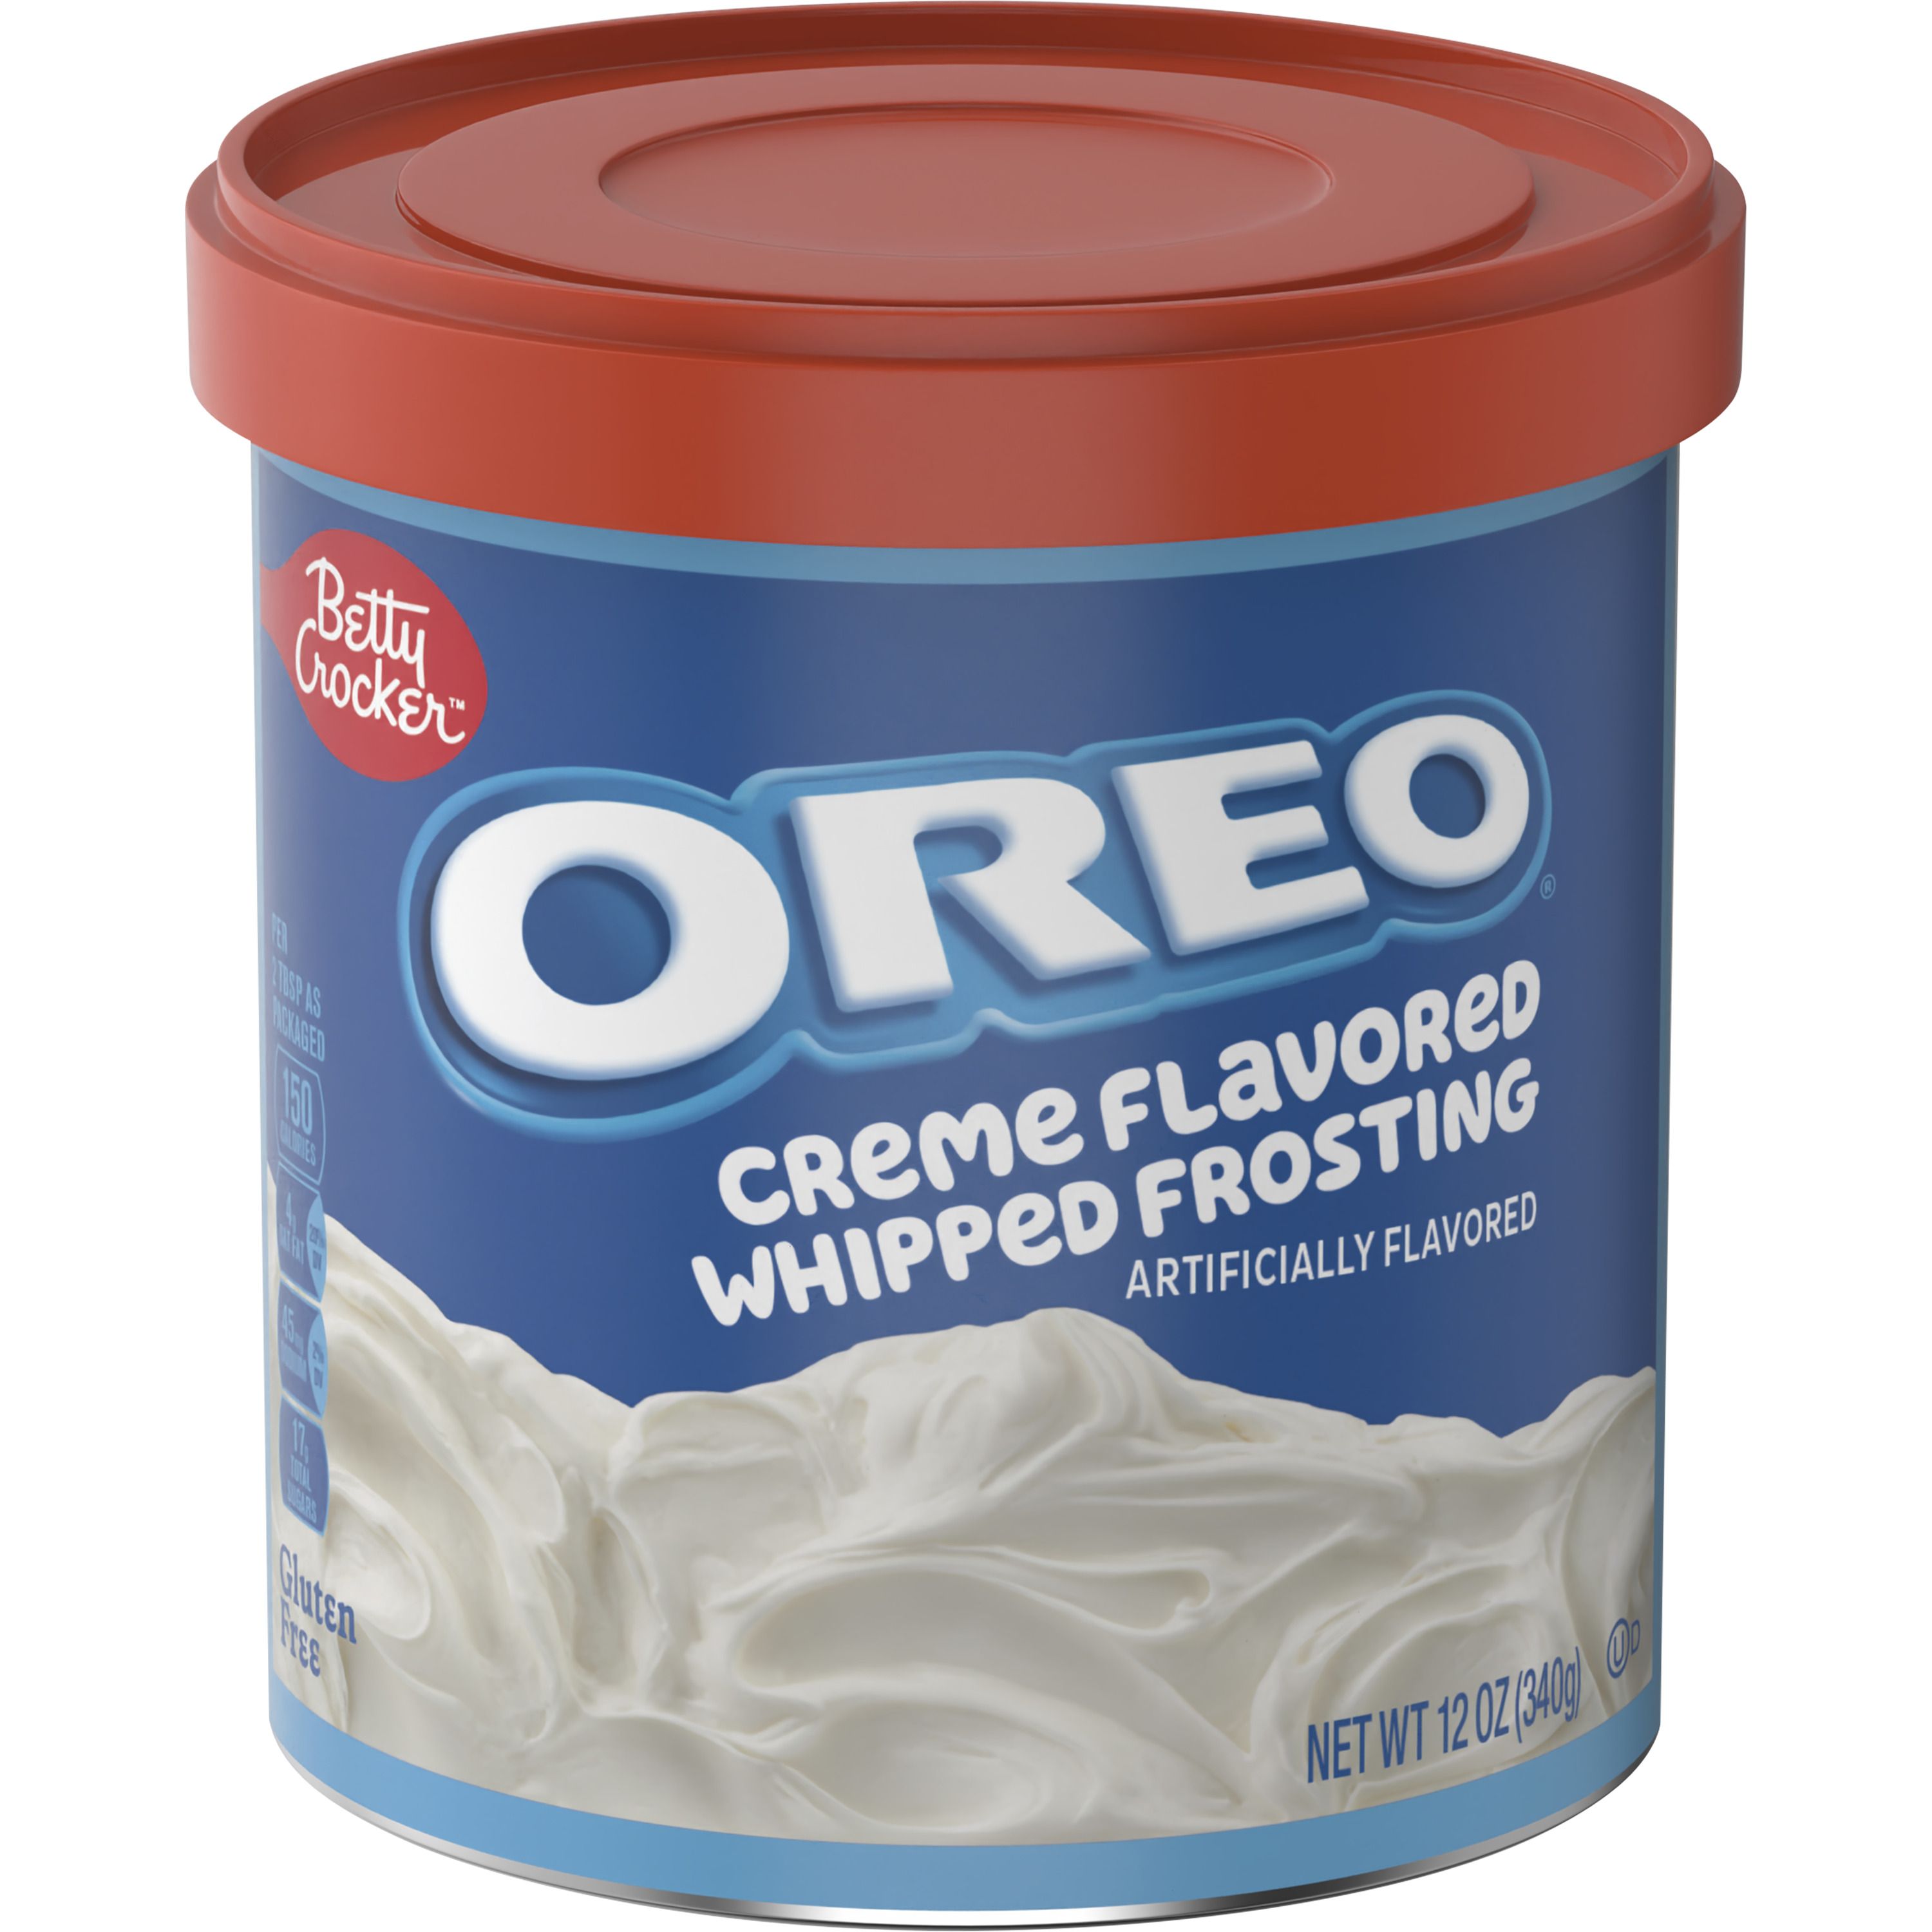 Betty Crocker OREO Creme Flavored Whipped Frosting, Gluten Free Frosting, 12 oz - Front